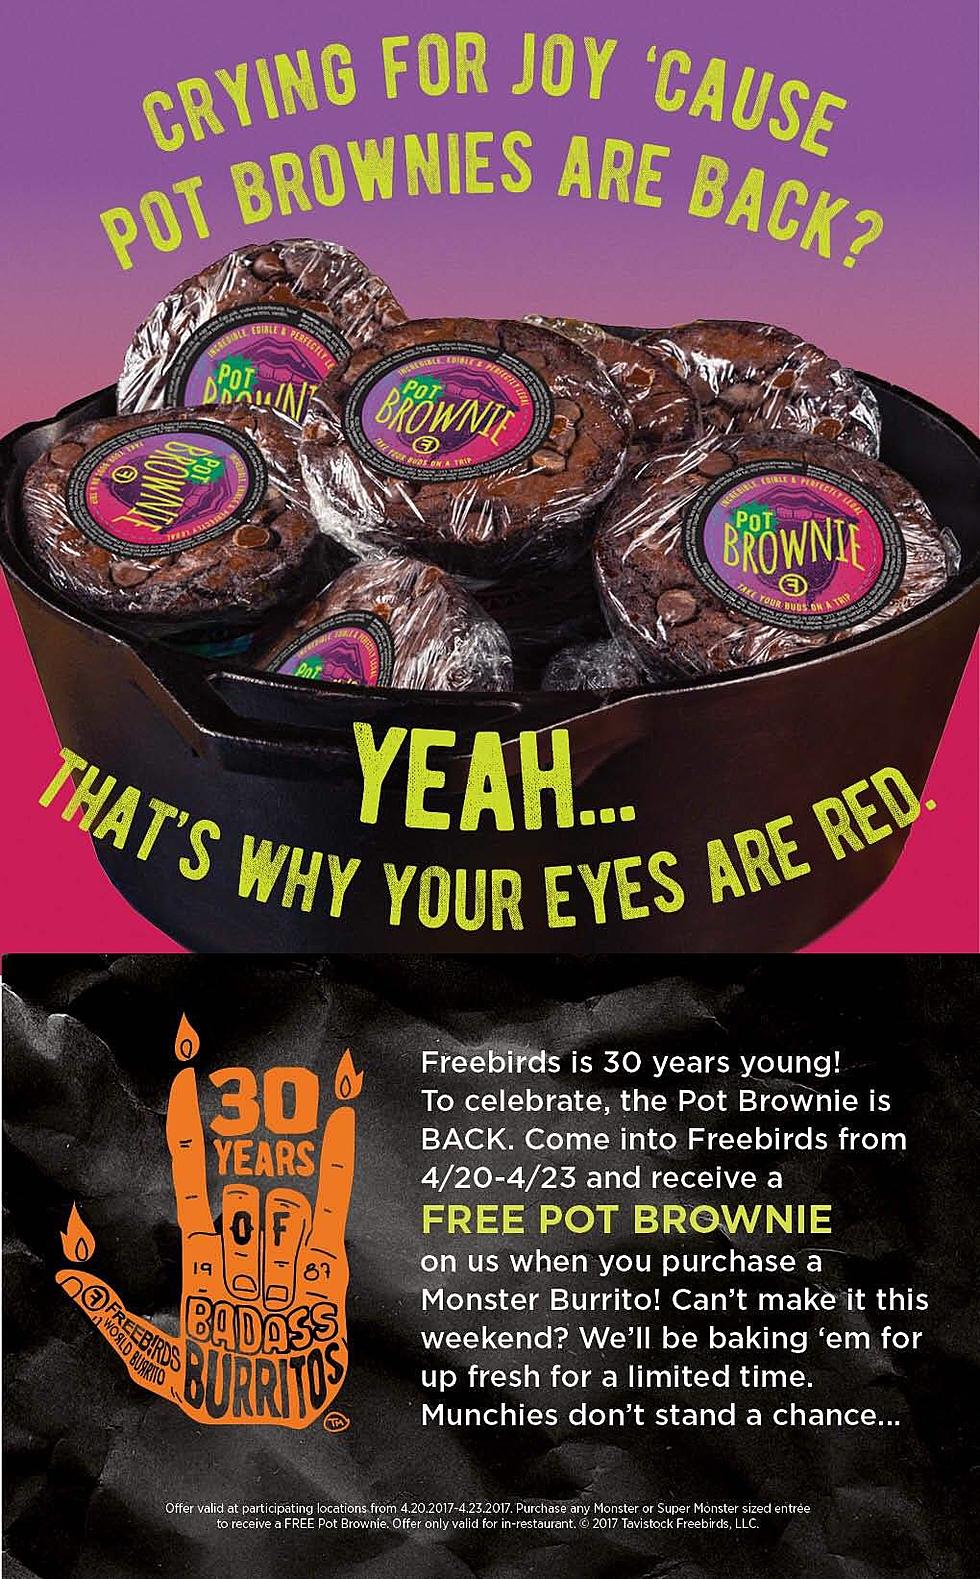 Today is the last day you can get a Pot Brownie at Free Birds&#8230;.Yes you read that right.